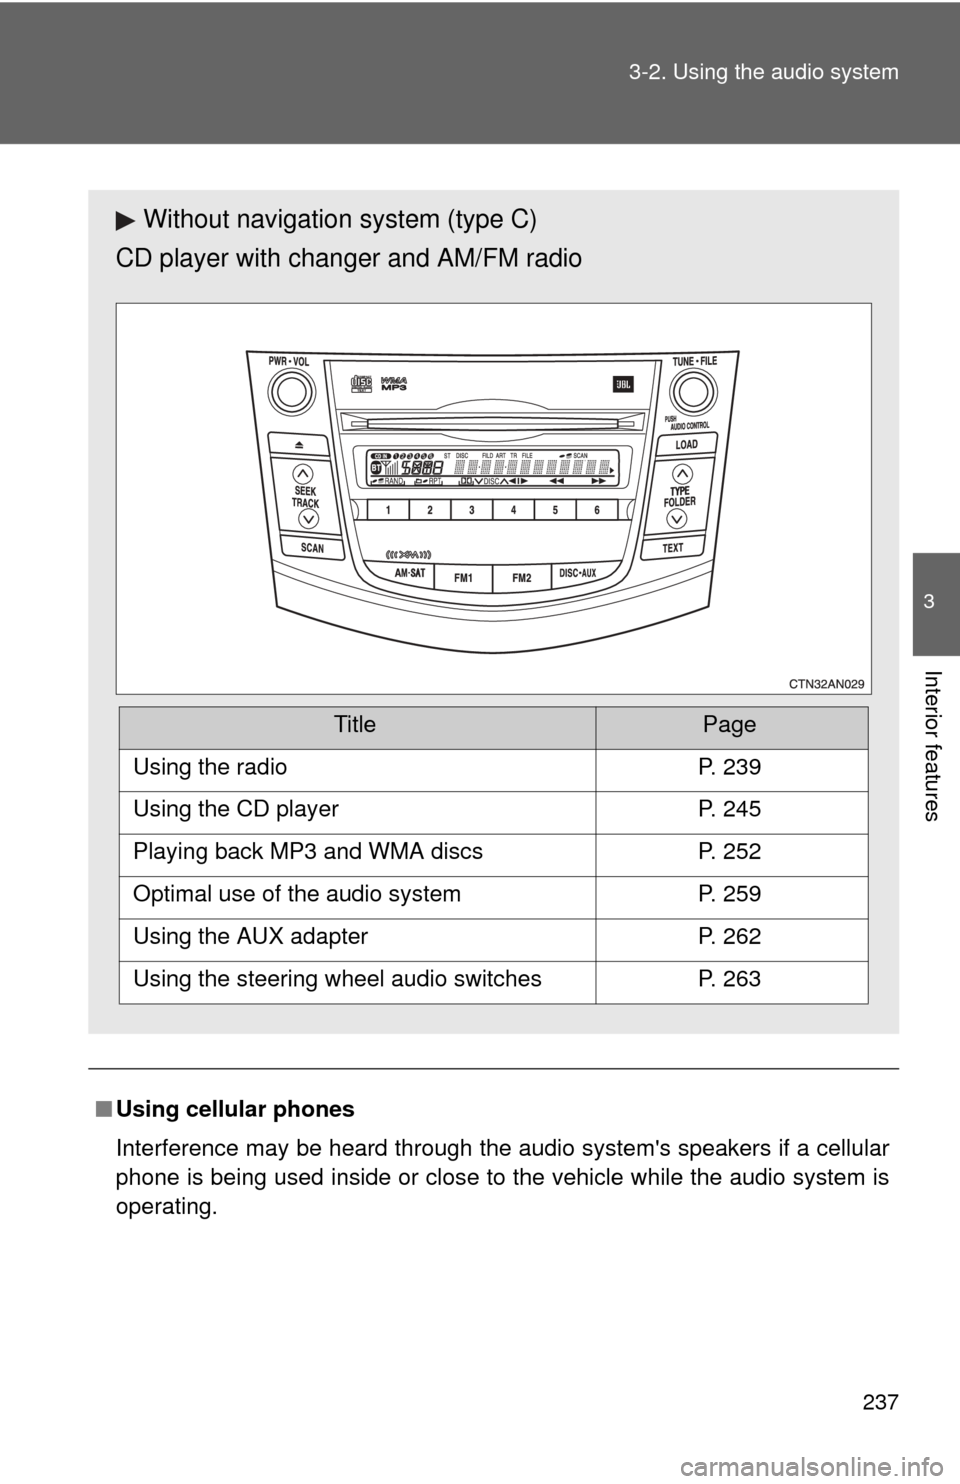 TOYOTA RAV4 2010 XA30 / 3.G Owners Manual 237
3-2. Using the audio system
3
Interior features
■
Using cellular phones
Interference may be heard through the audio systems speakers if a cellular
phone is being used inside or close to the veh